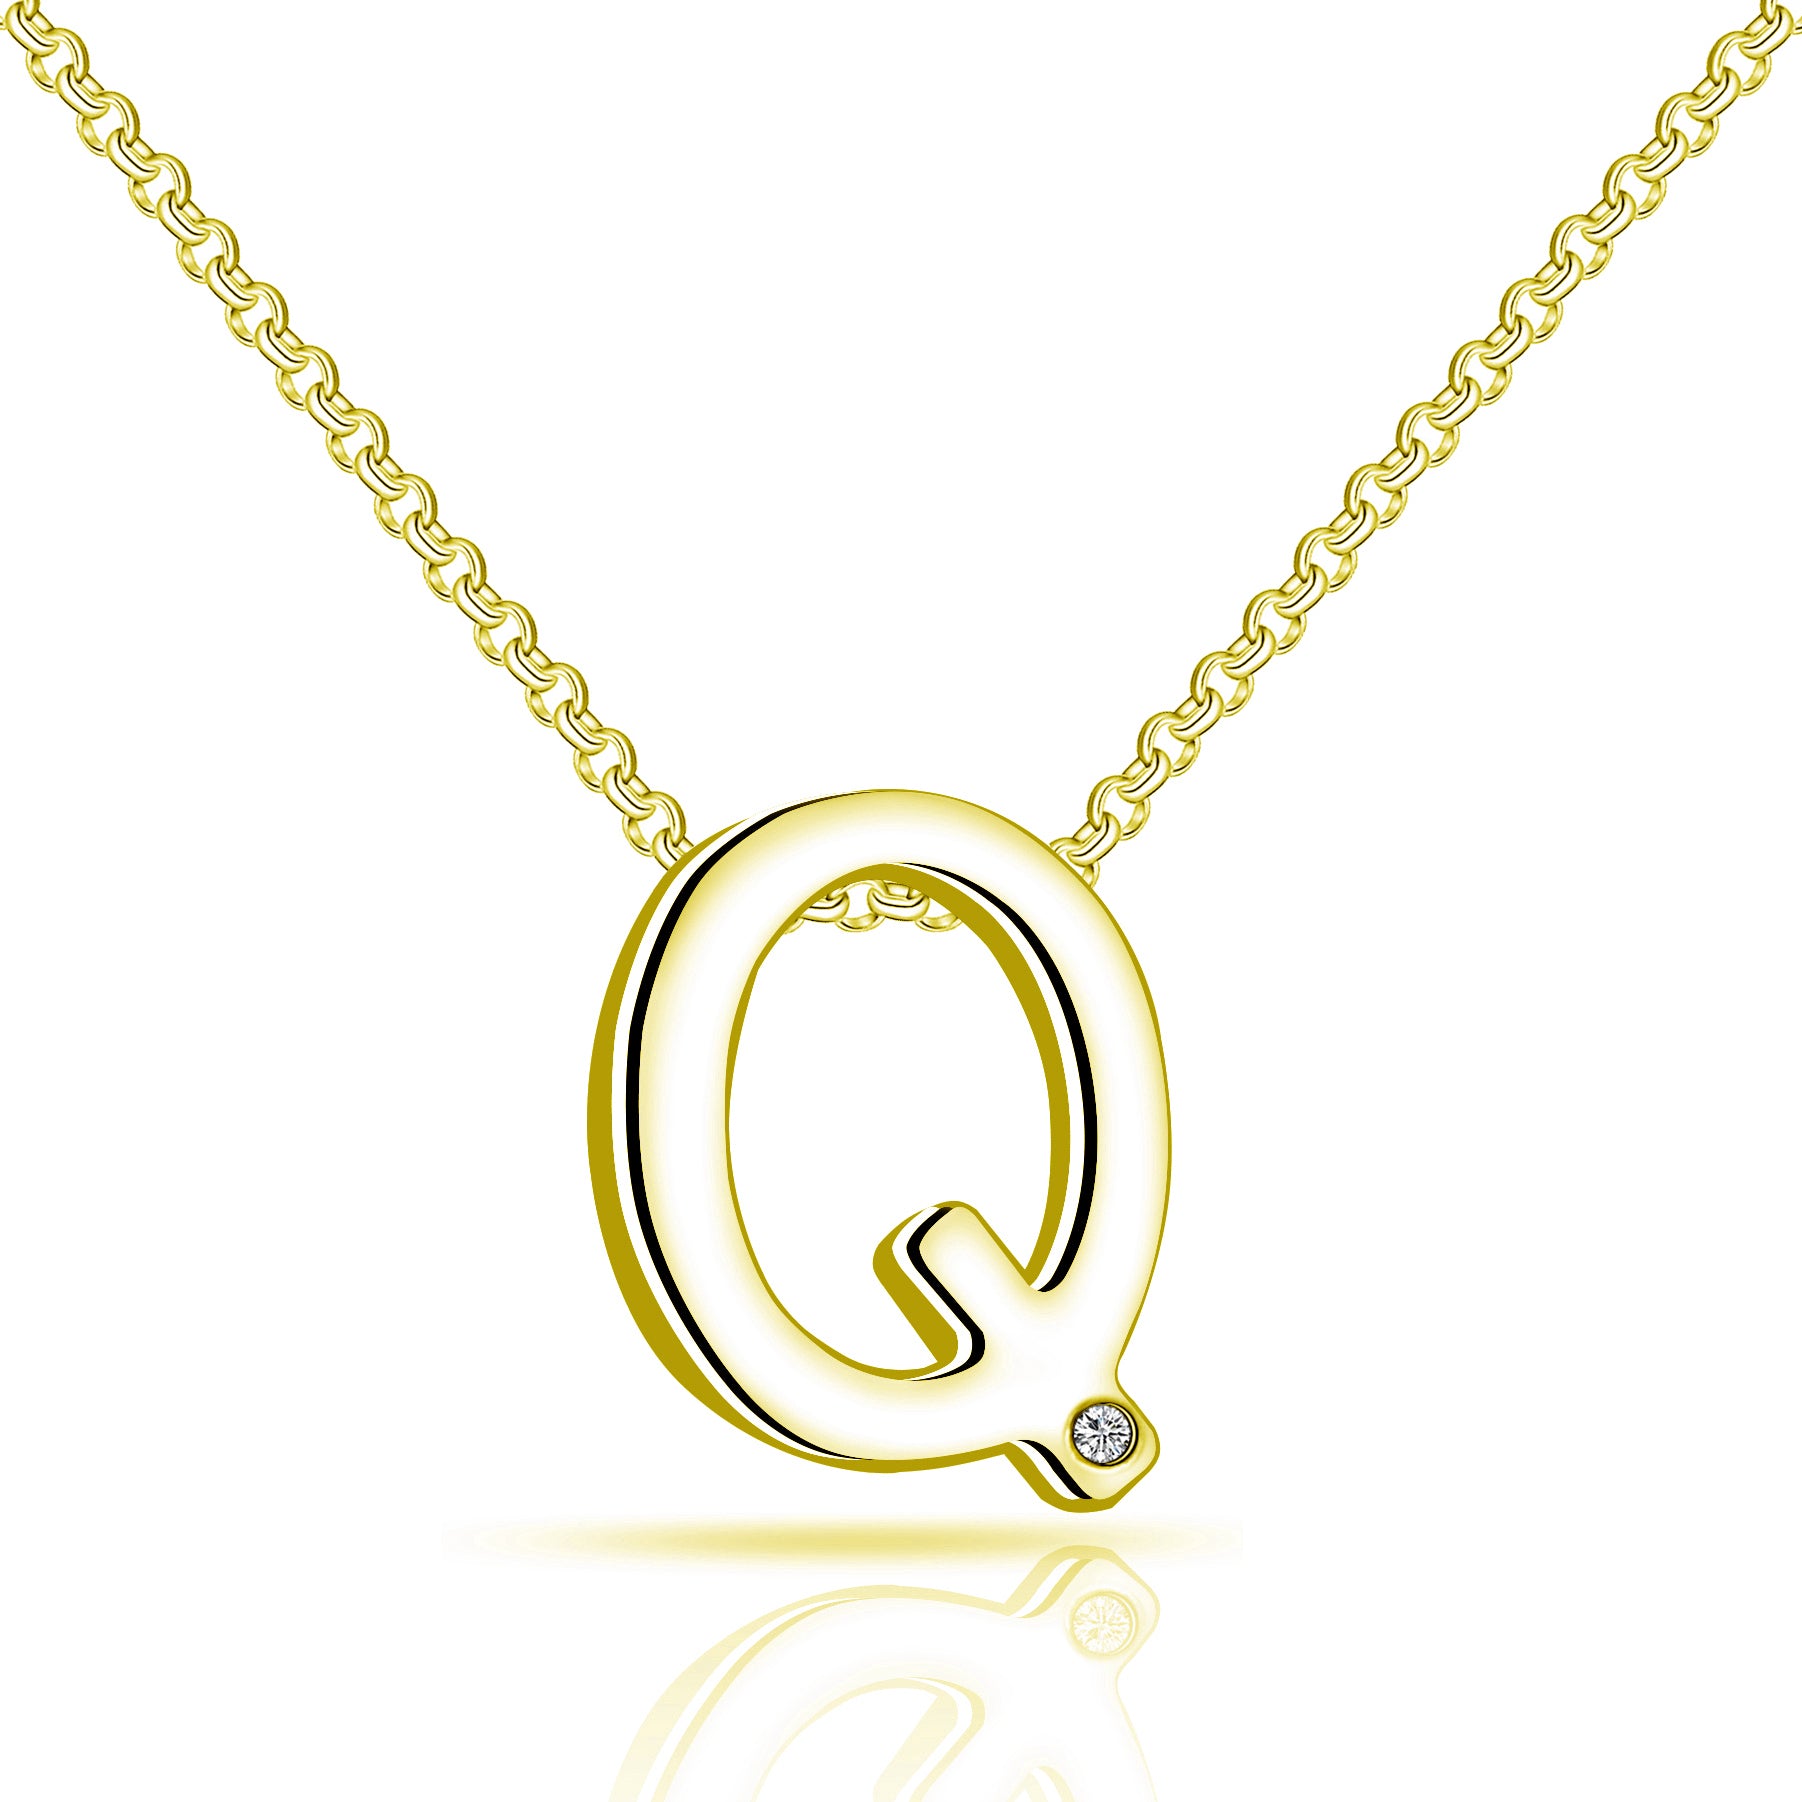 Gold Plated Initial Necklace Letter Q Created with Zircondia® Crystals by Philip Jones Jewellery